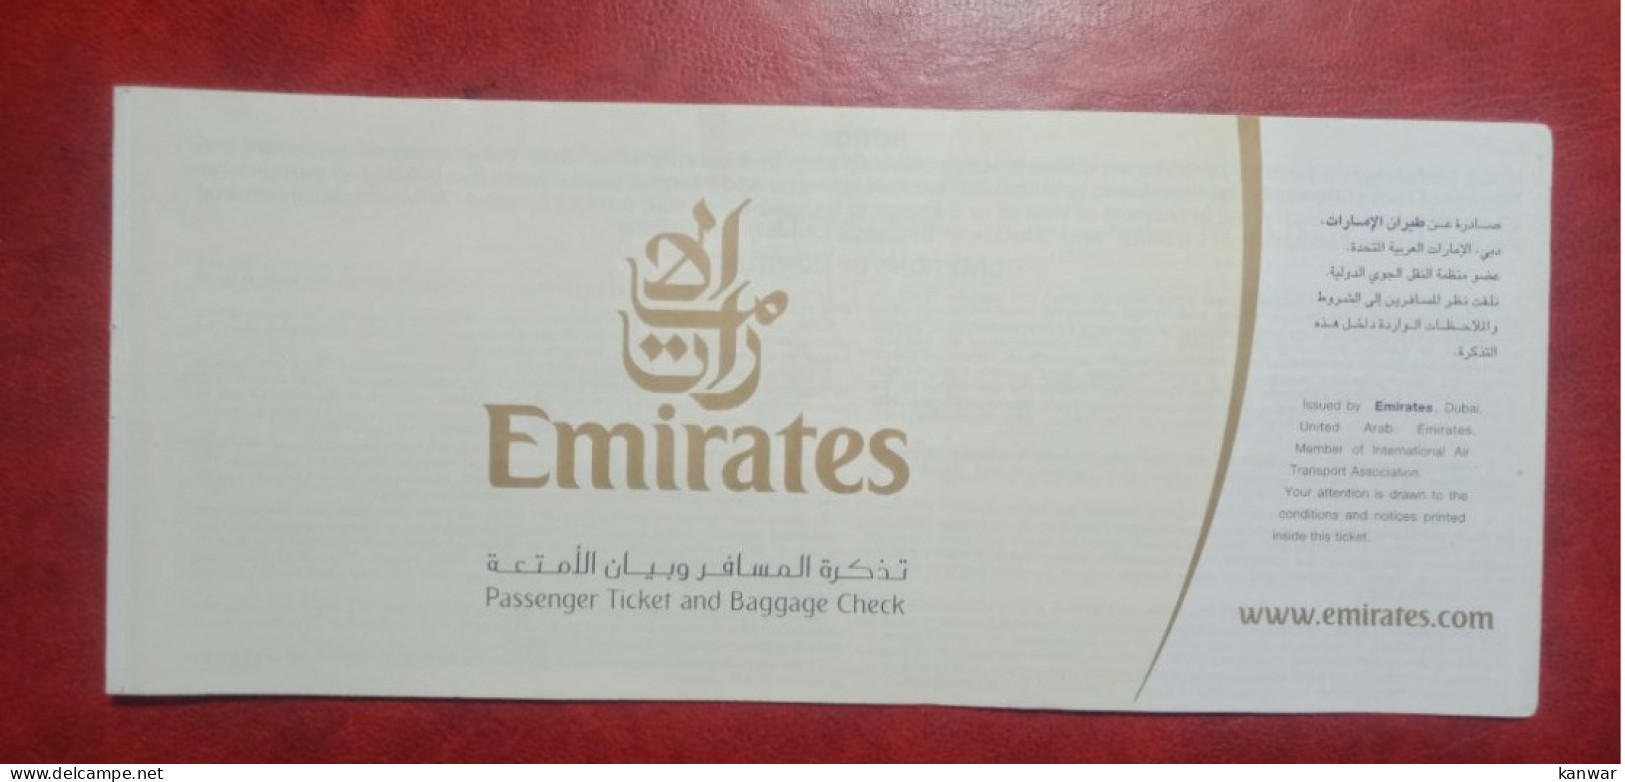 2001 EMIRATES INTERNATIONAL AIRLINES PASSENGER TICKET AND BAGGAGE CHECK - Tickets